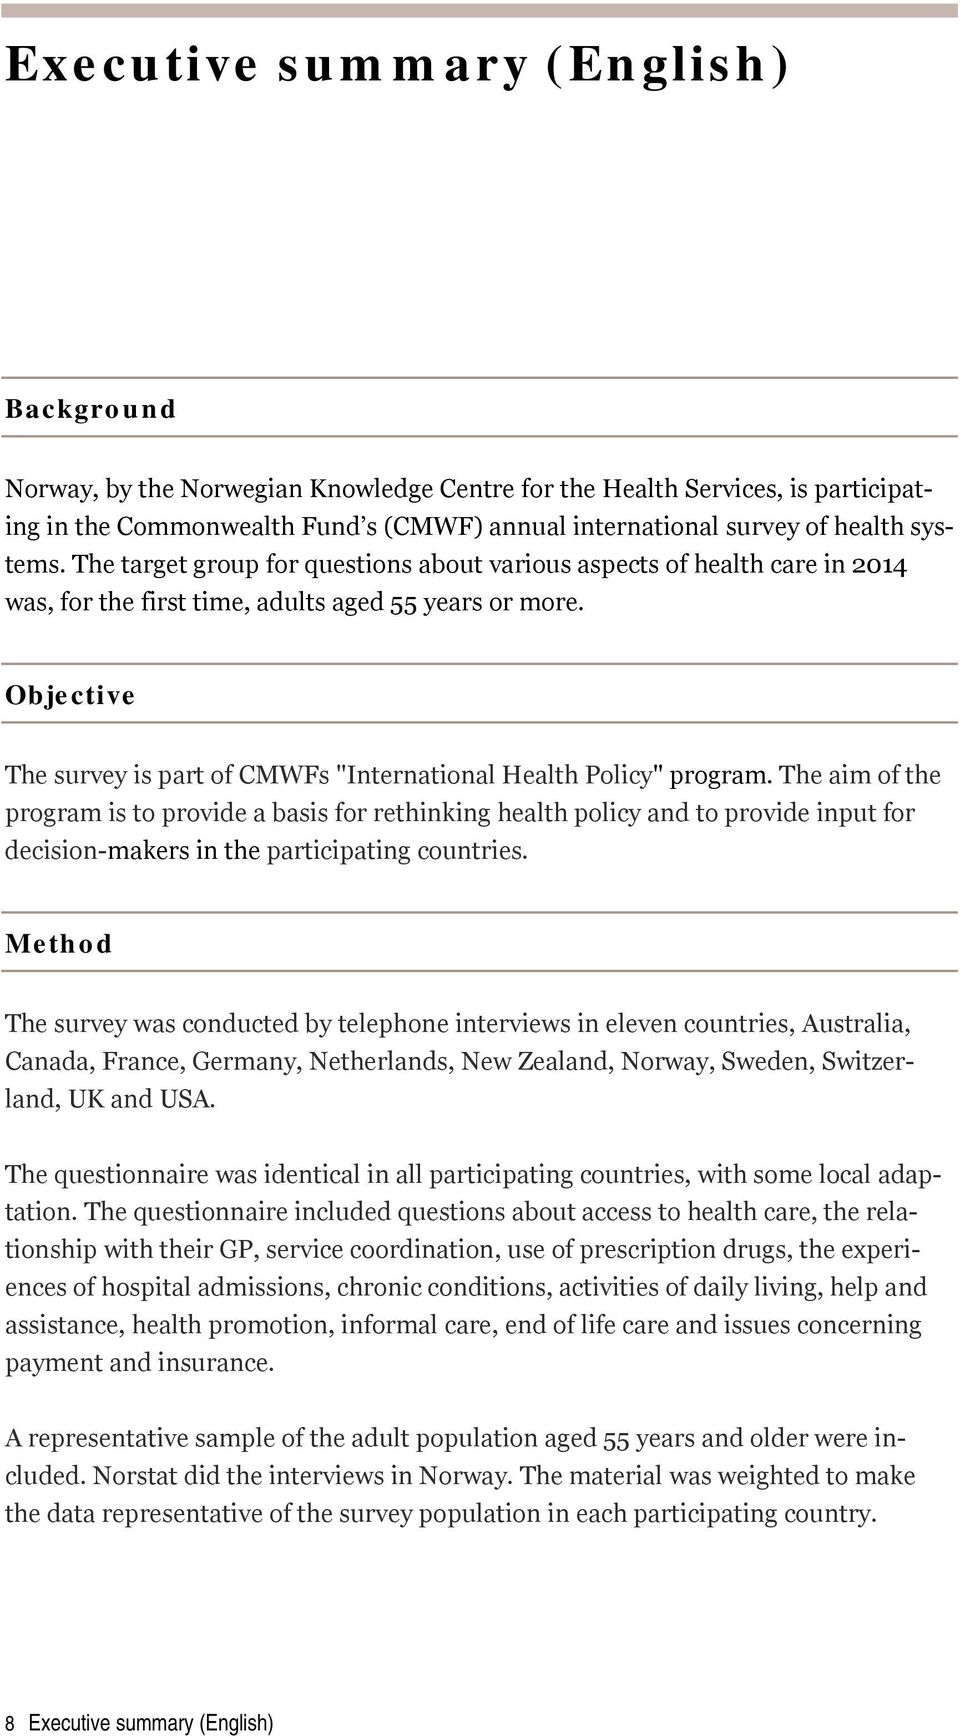 Objective The survey is part of CMWFs "International Health Policy" program.